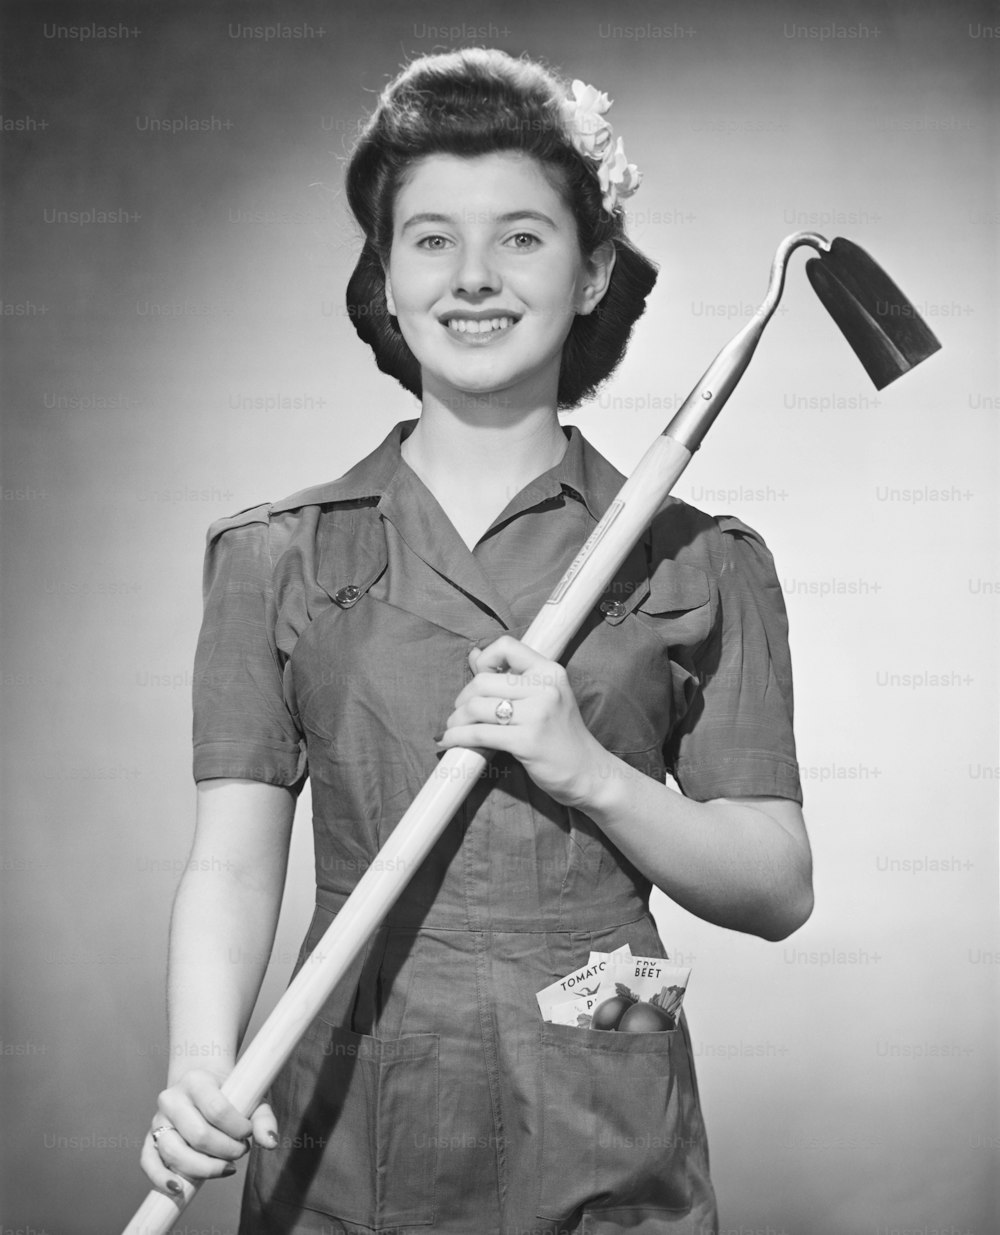 a woman in a uniform holding a large stick